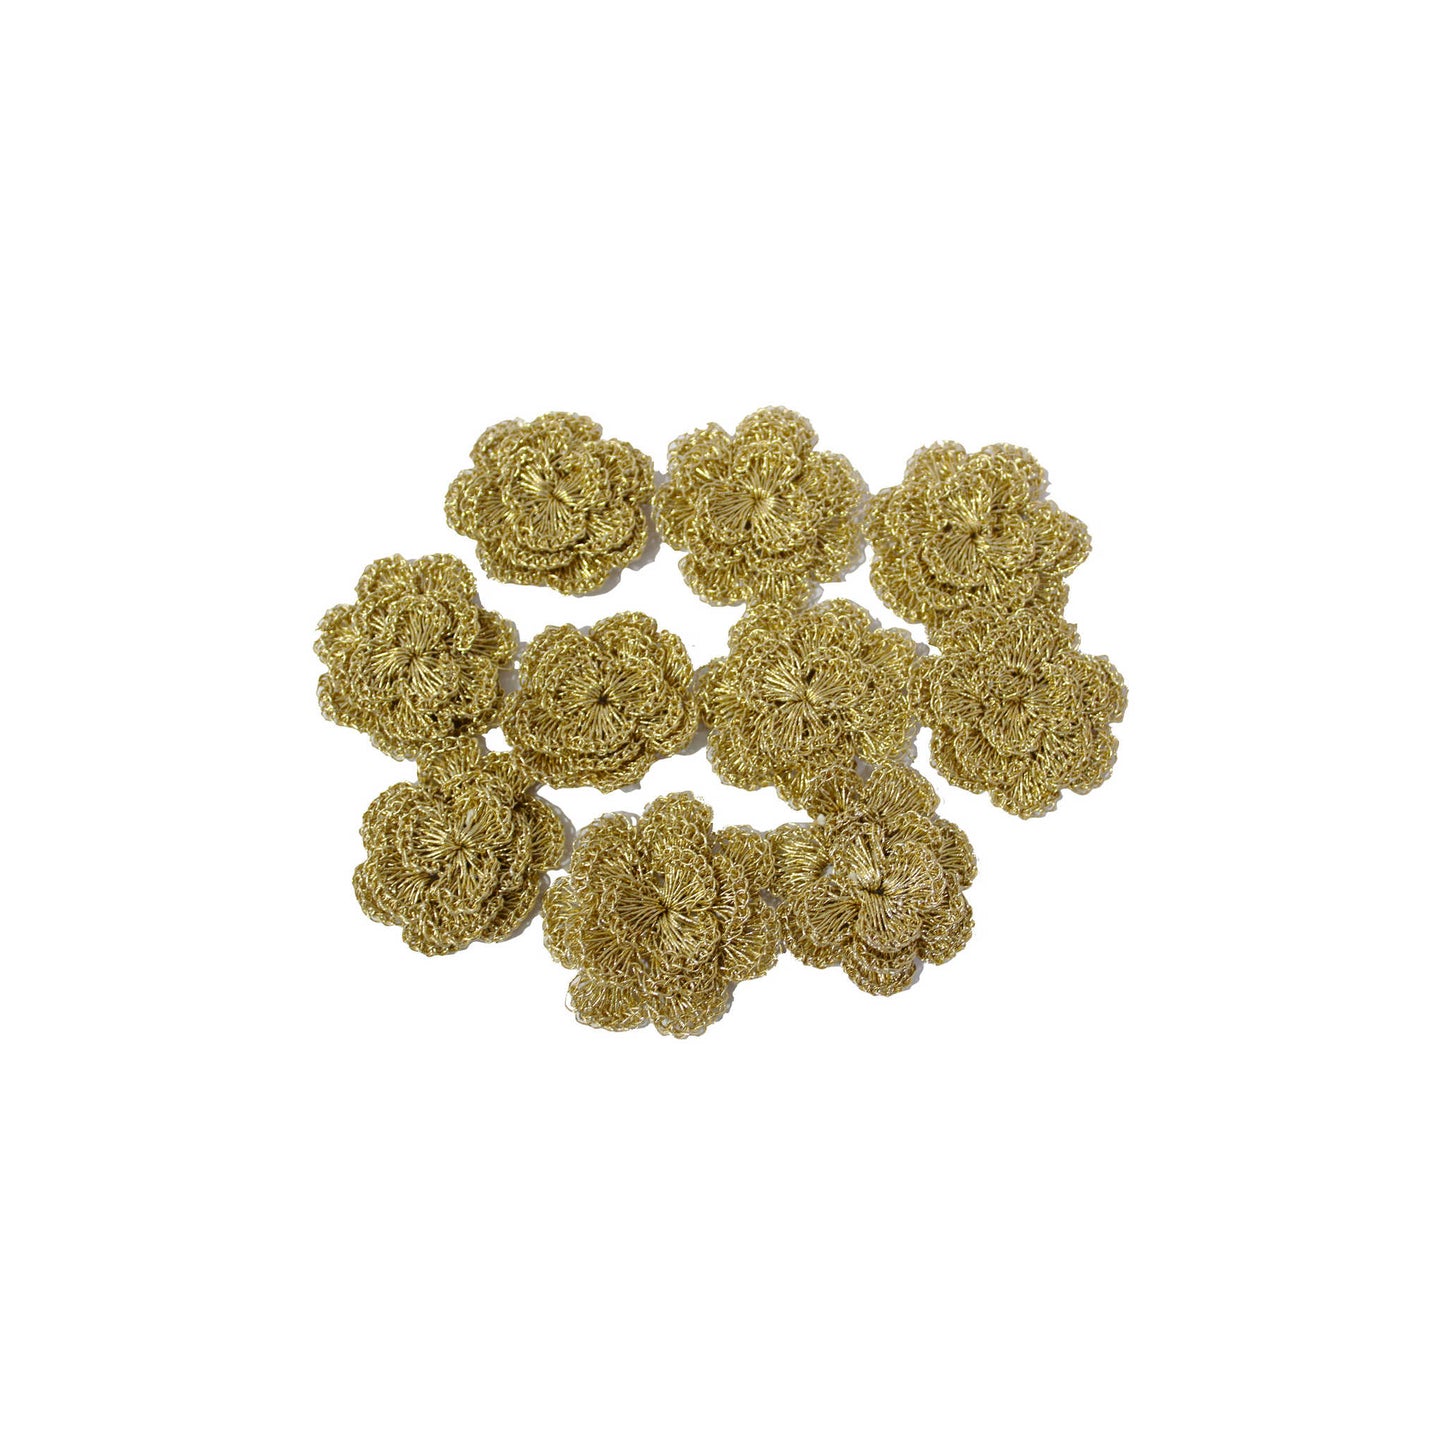 Indian Petals Golden Zari Thread Floral Motif for Jewelry, Craft or Decoration - 502